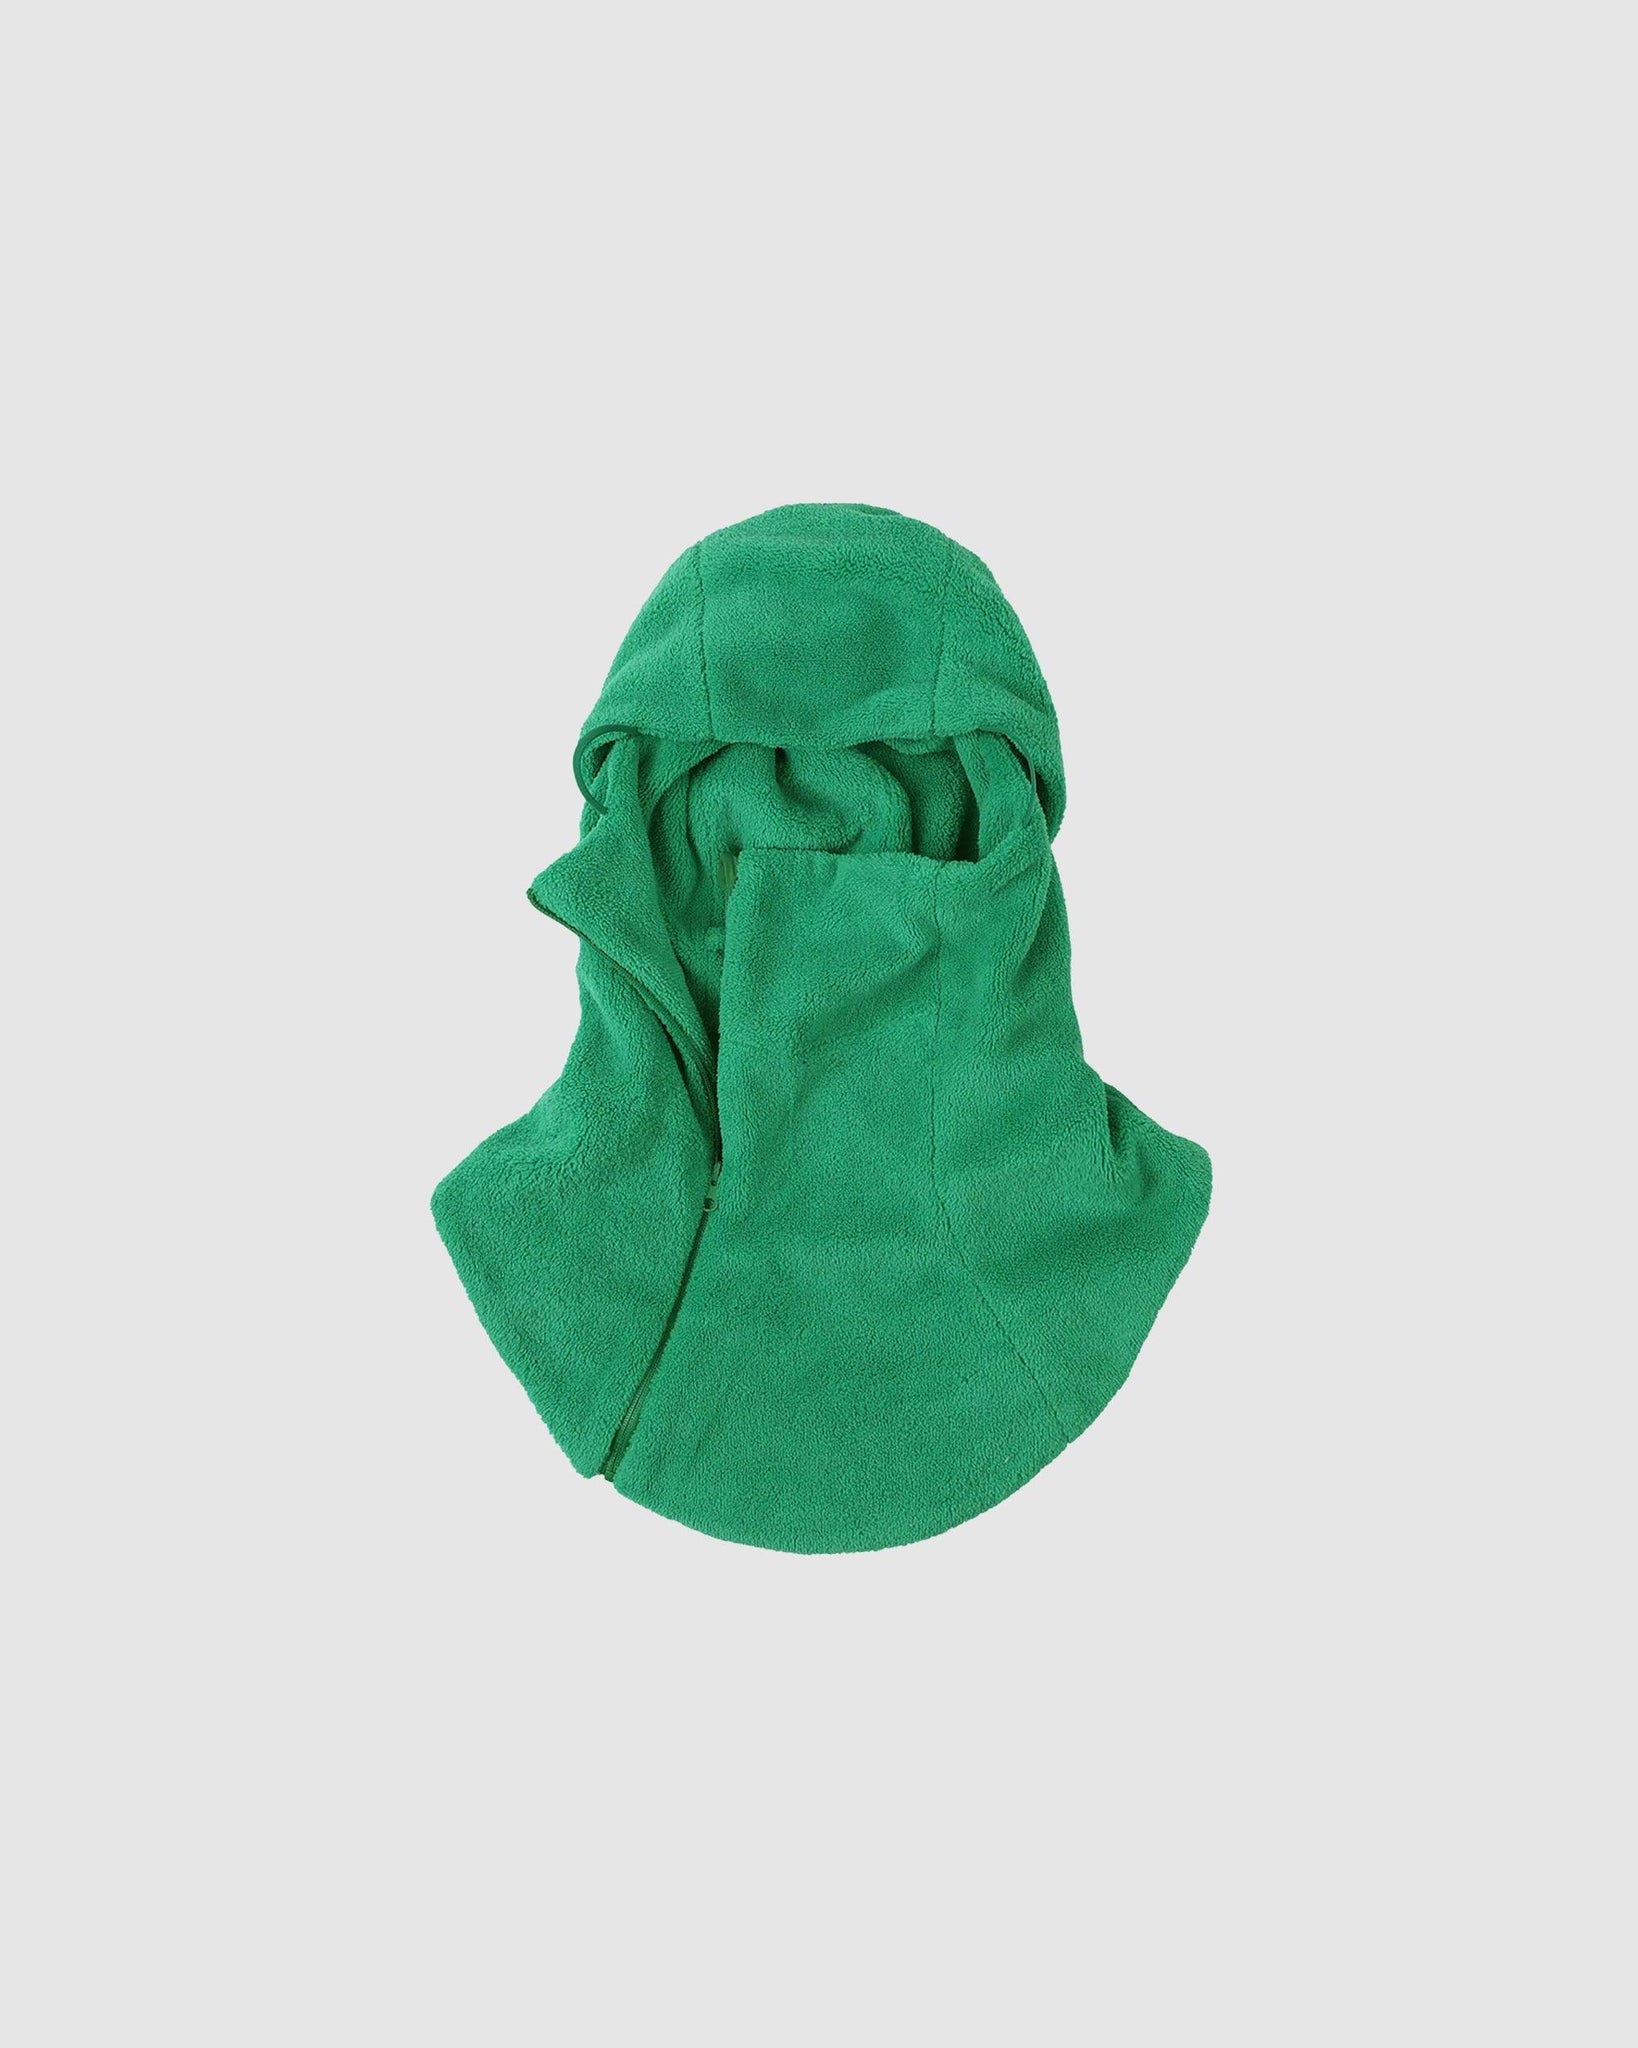 5.1 Balaclava Right Green - {{ collection.title }} - Chinatown Country Club 